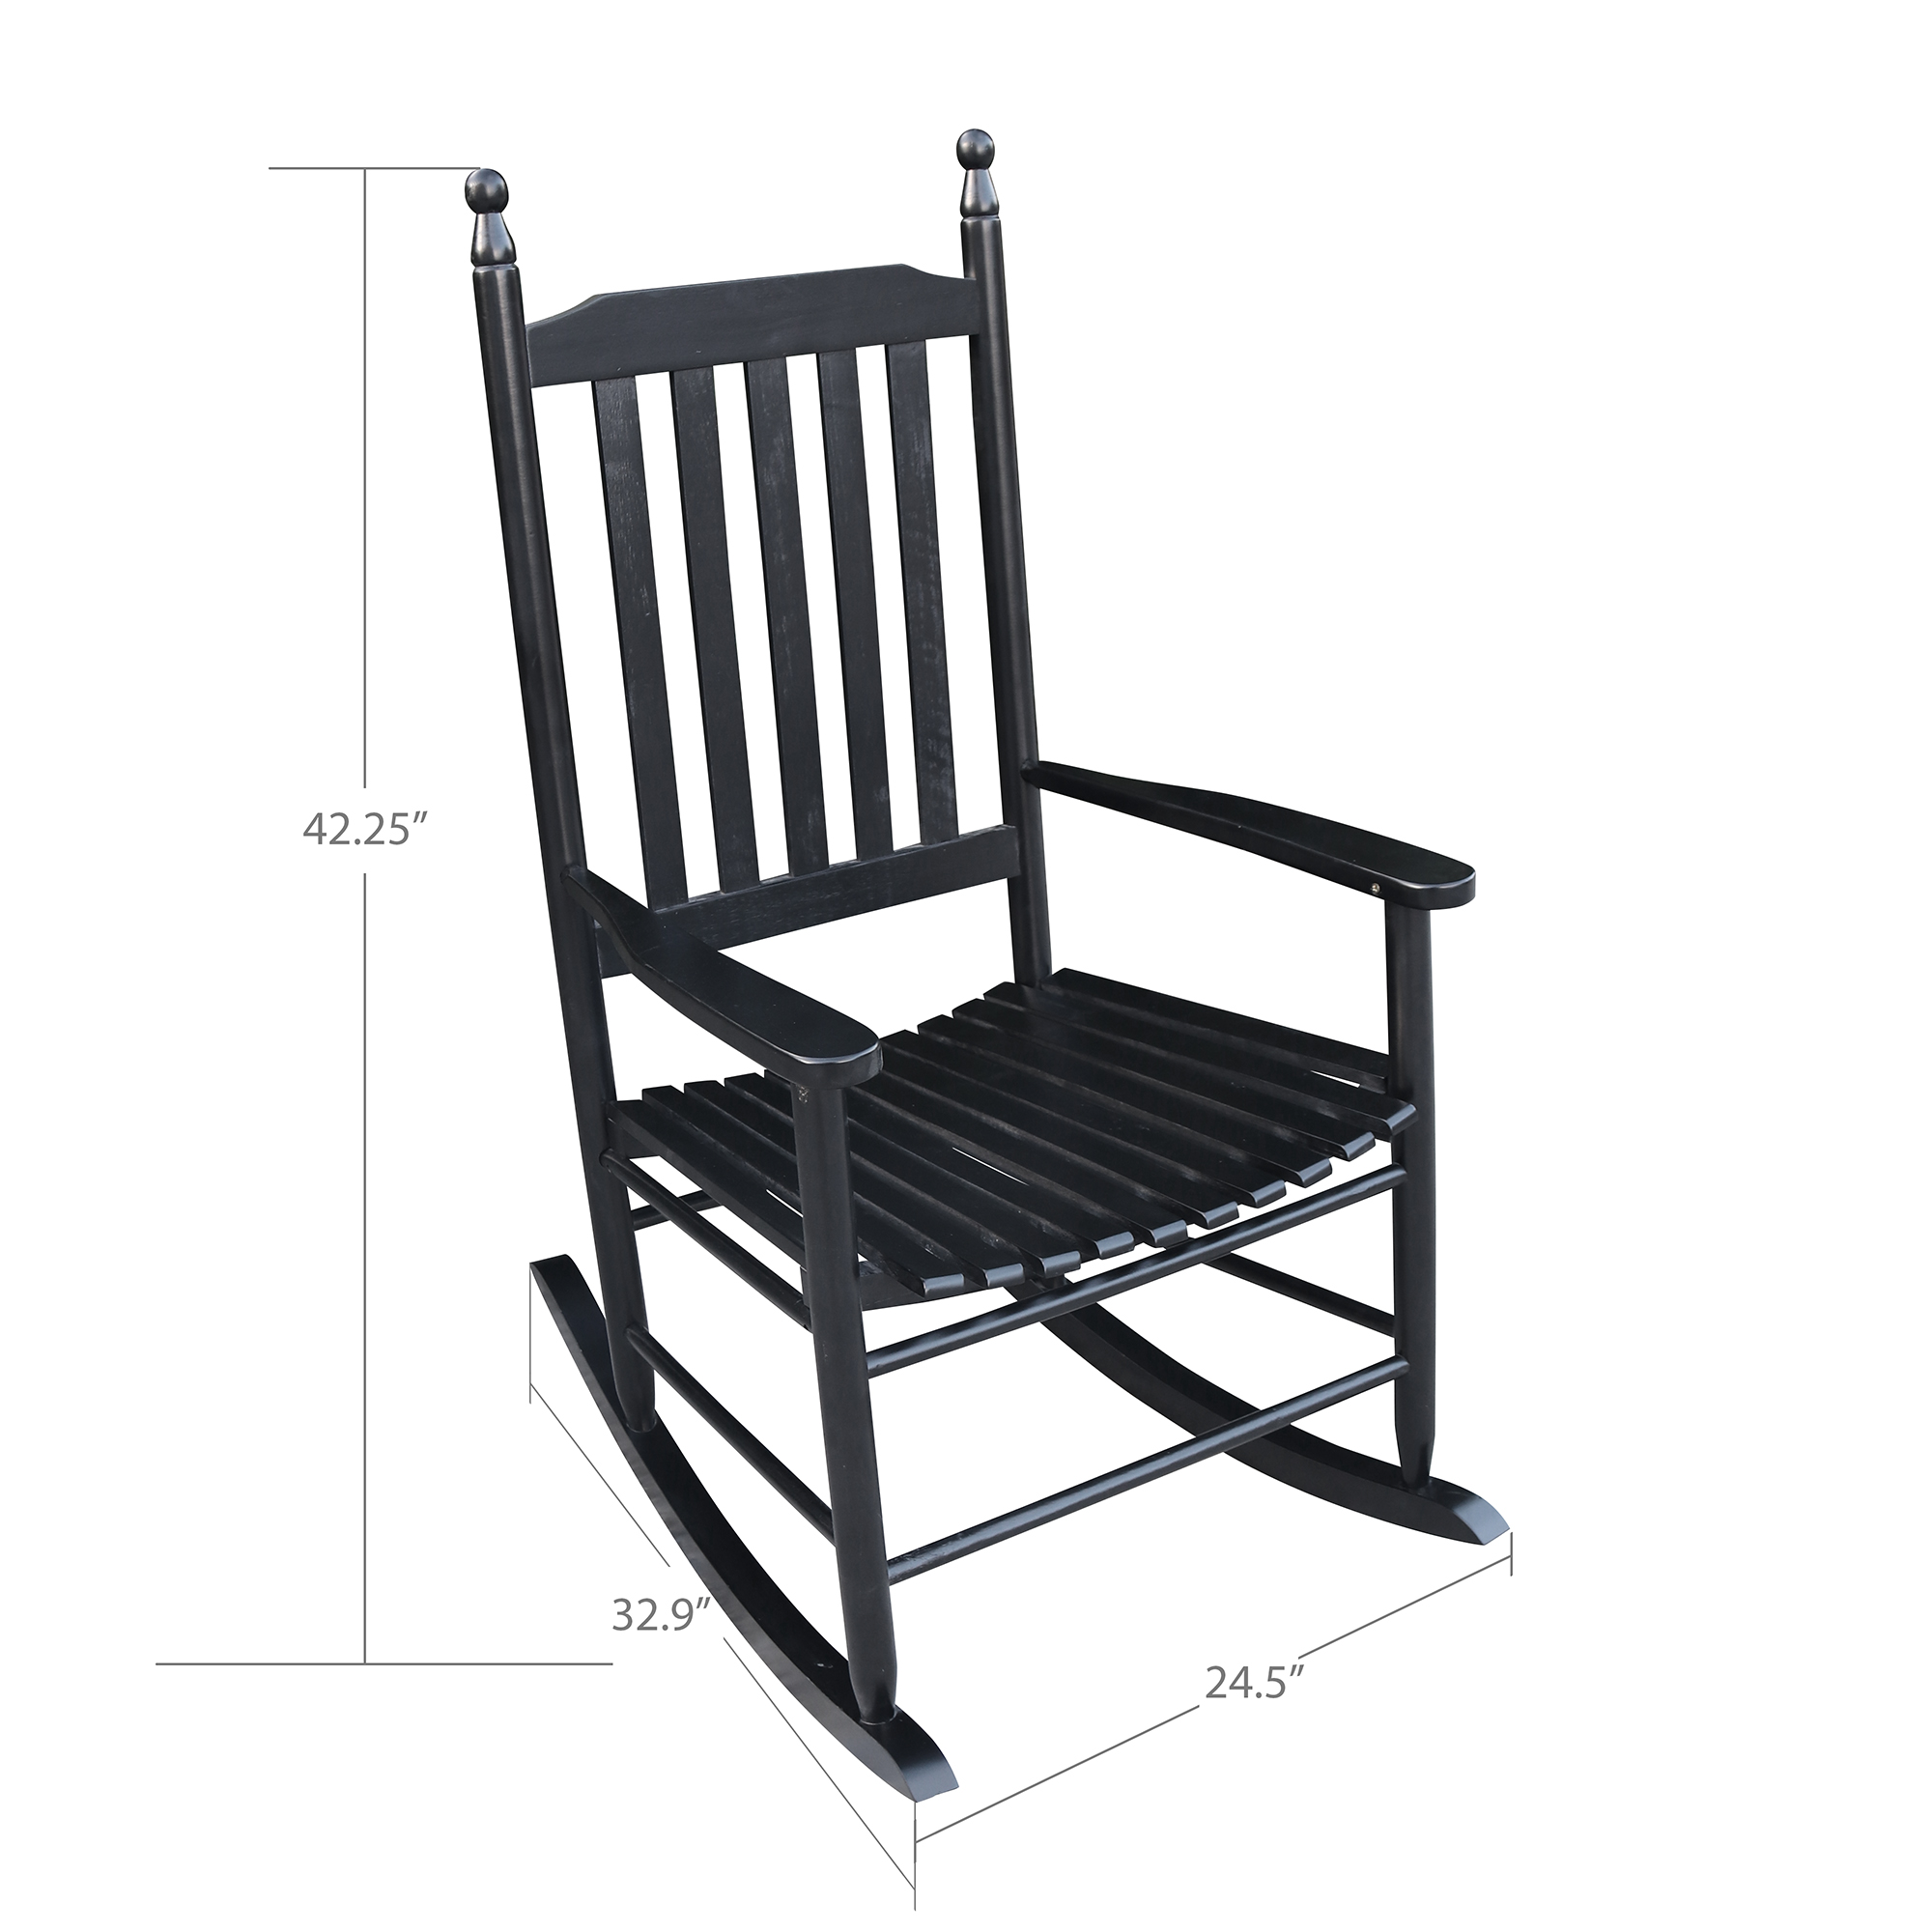 Rocking Chair for Outdoor, Wooden Patio Porch Rocker Chair with Back Support, Ergonomic Wooden Rocking Chair for Patio Porch Backyard, Rocking Bistro Chair Patio Chairs, Max 280lbs, Black, A1592 - image 2 of 7